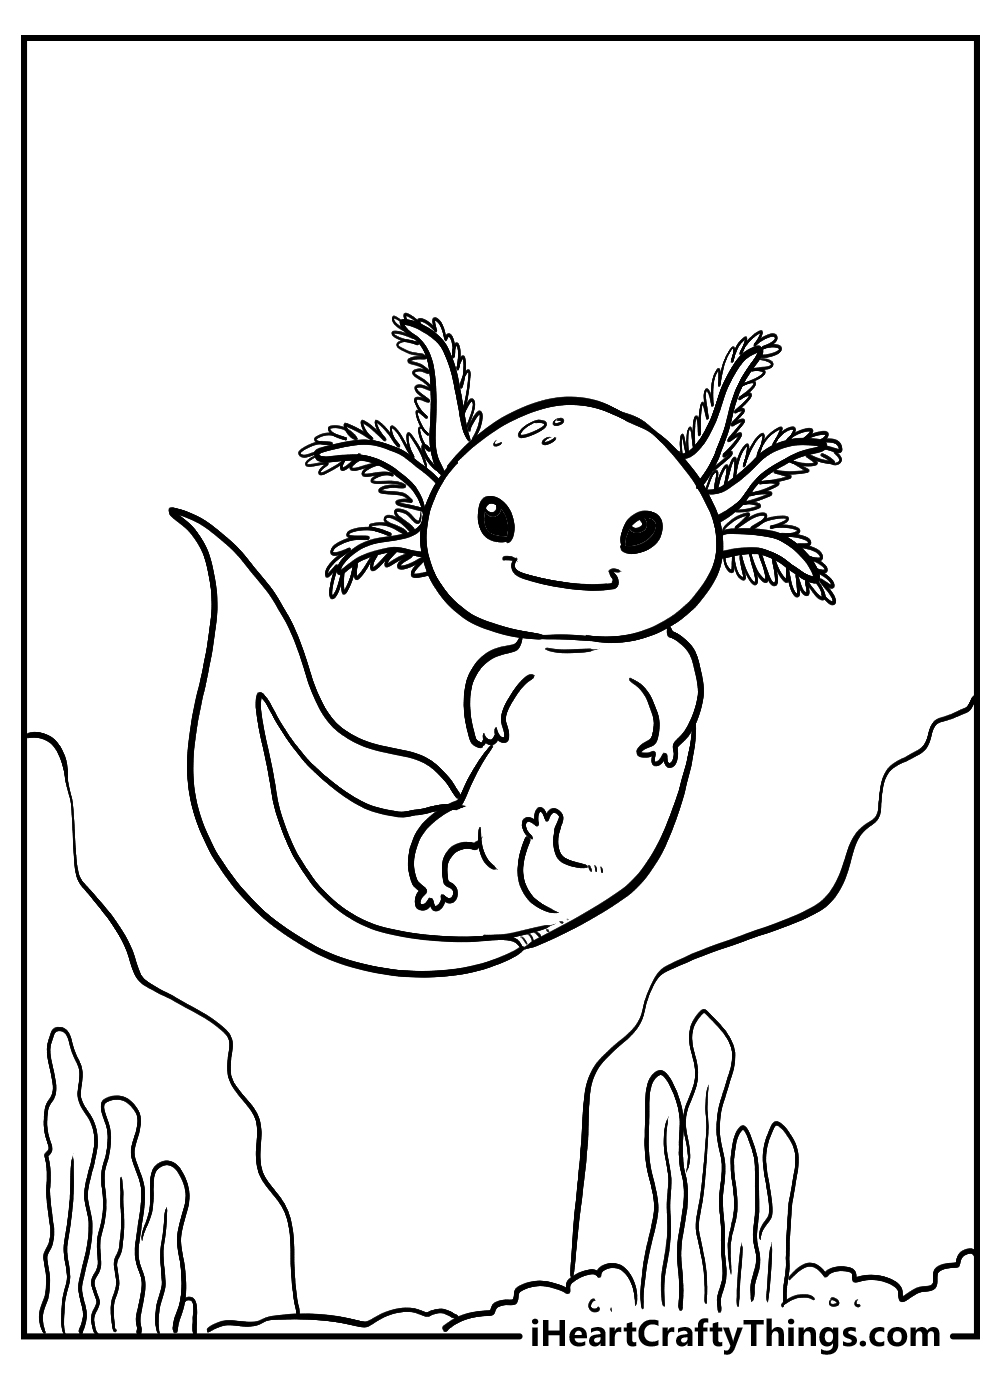 axolotl coloring pages for kids